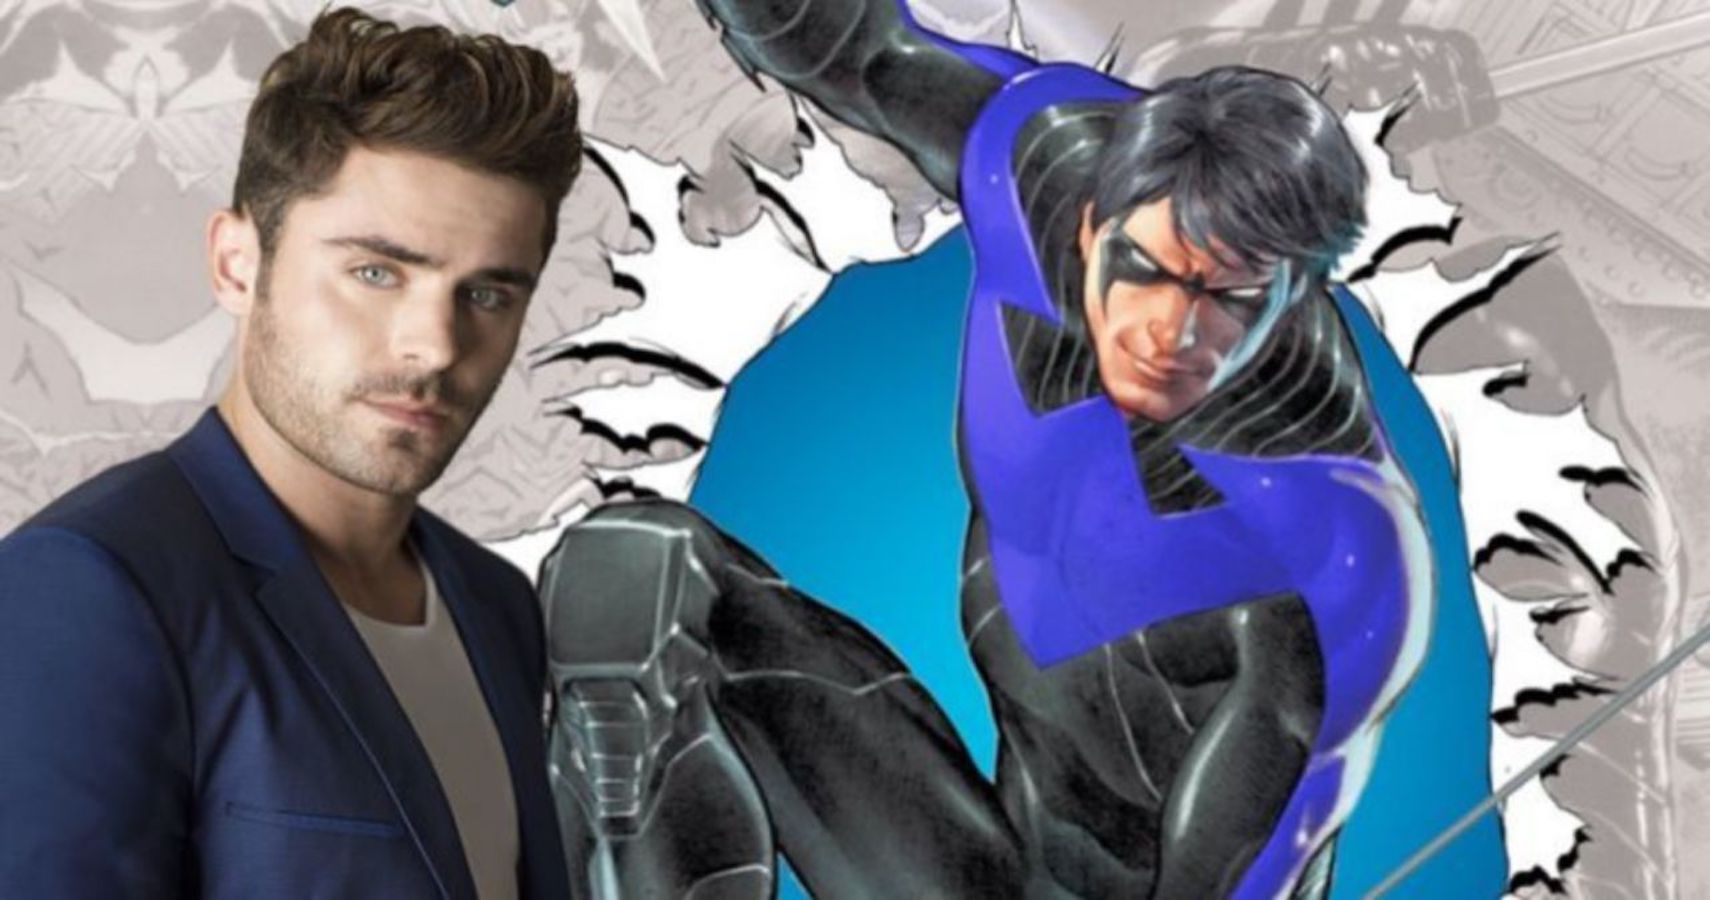 Zac Efron Reimagined as 7 Different Superheroes | ScreenRant